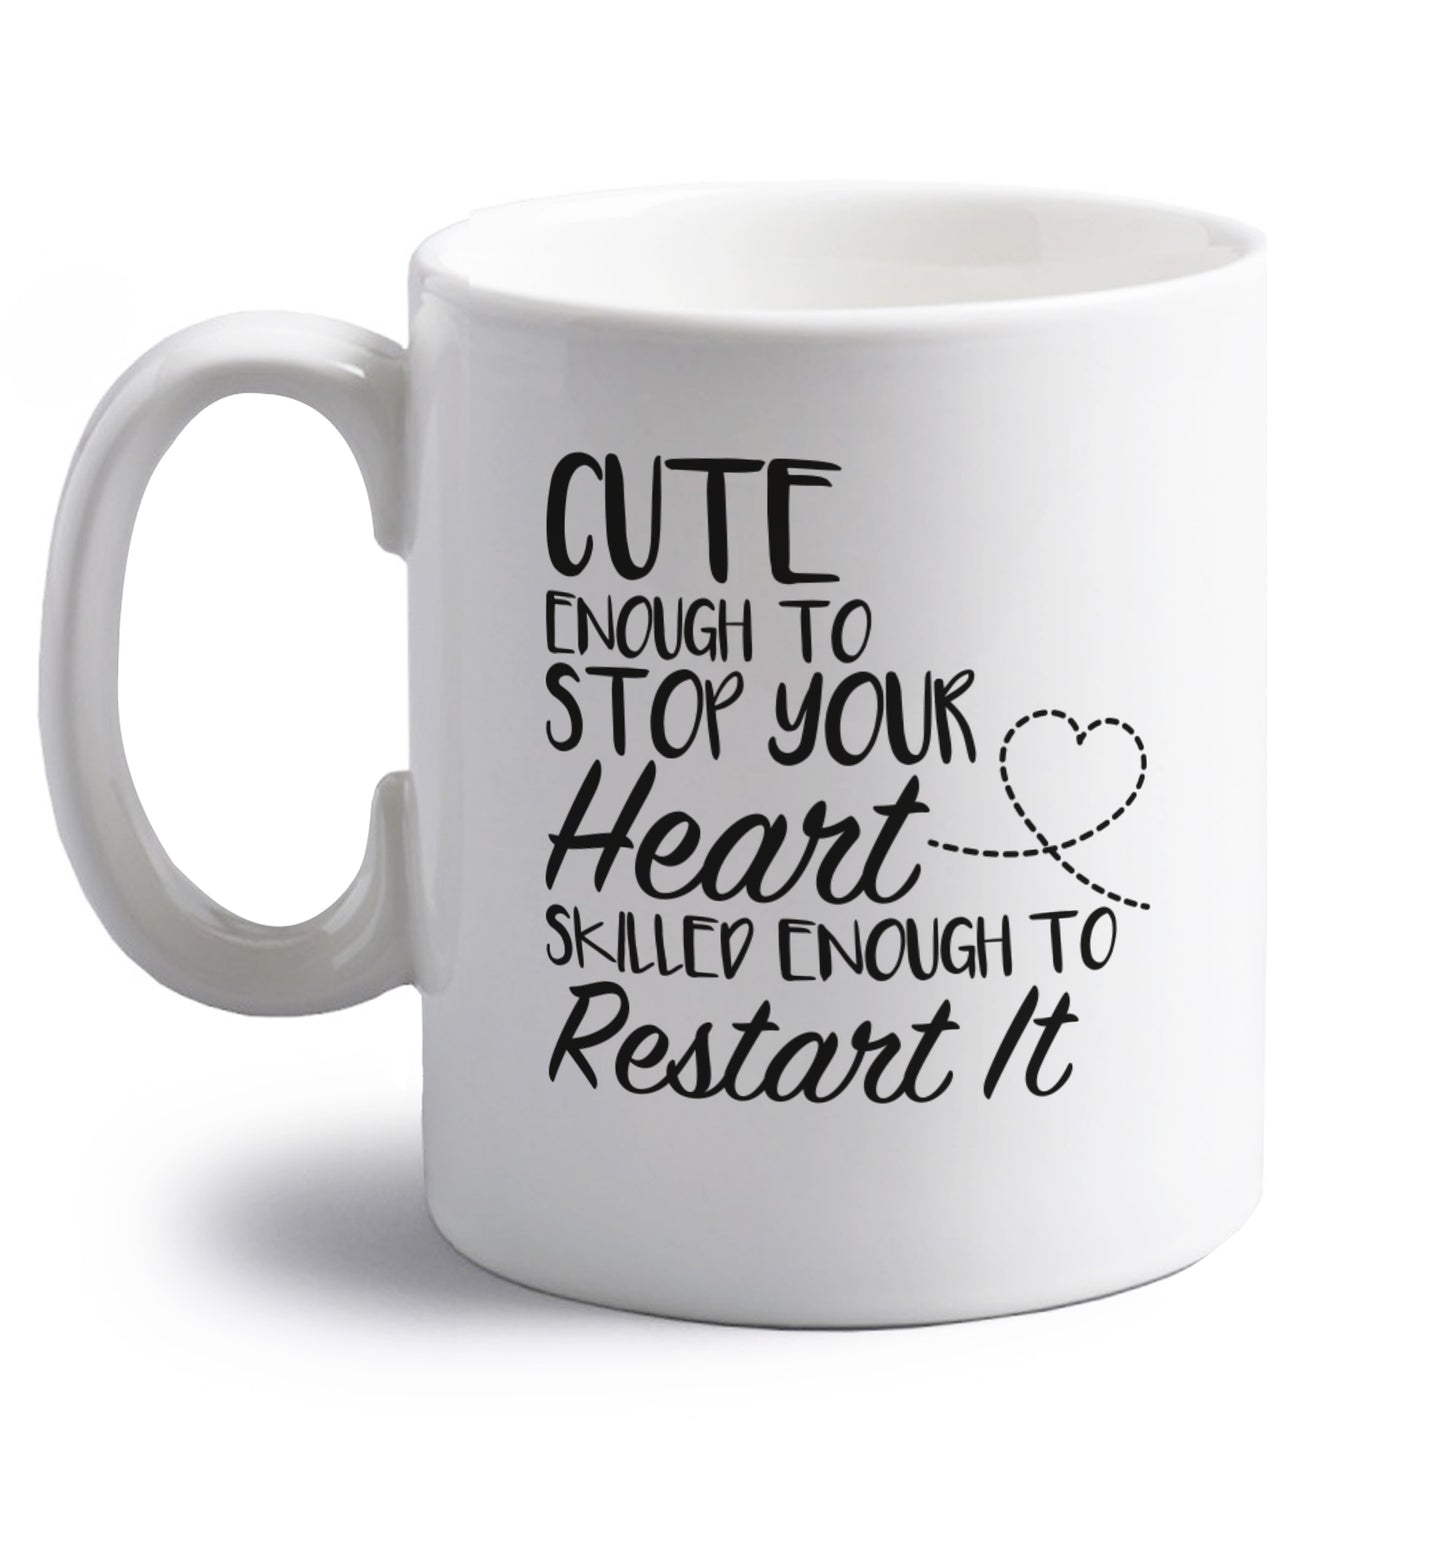 Cute enough to stop your heart skilled enough to restart it right handed white ceramic mug 